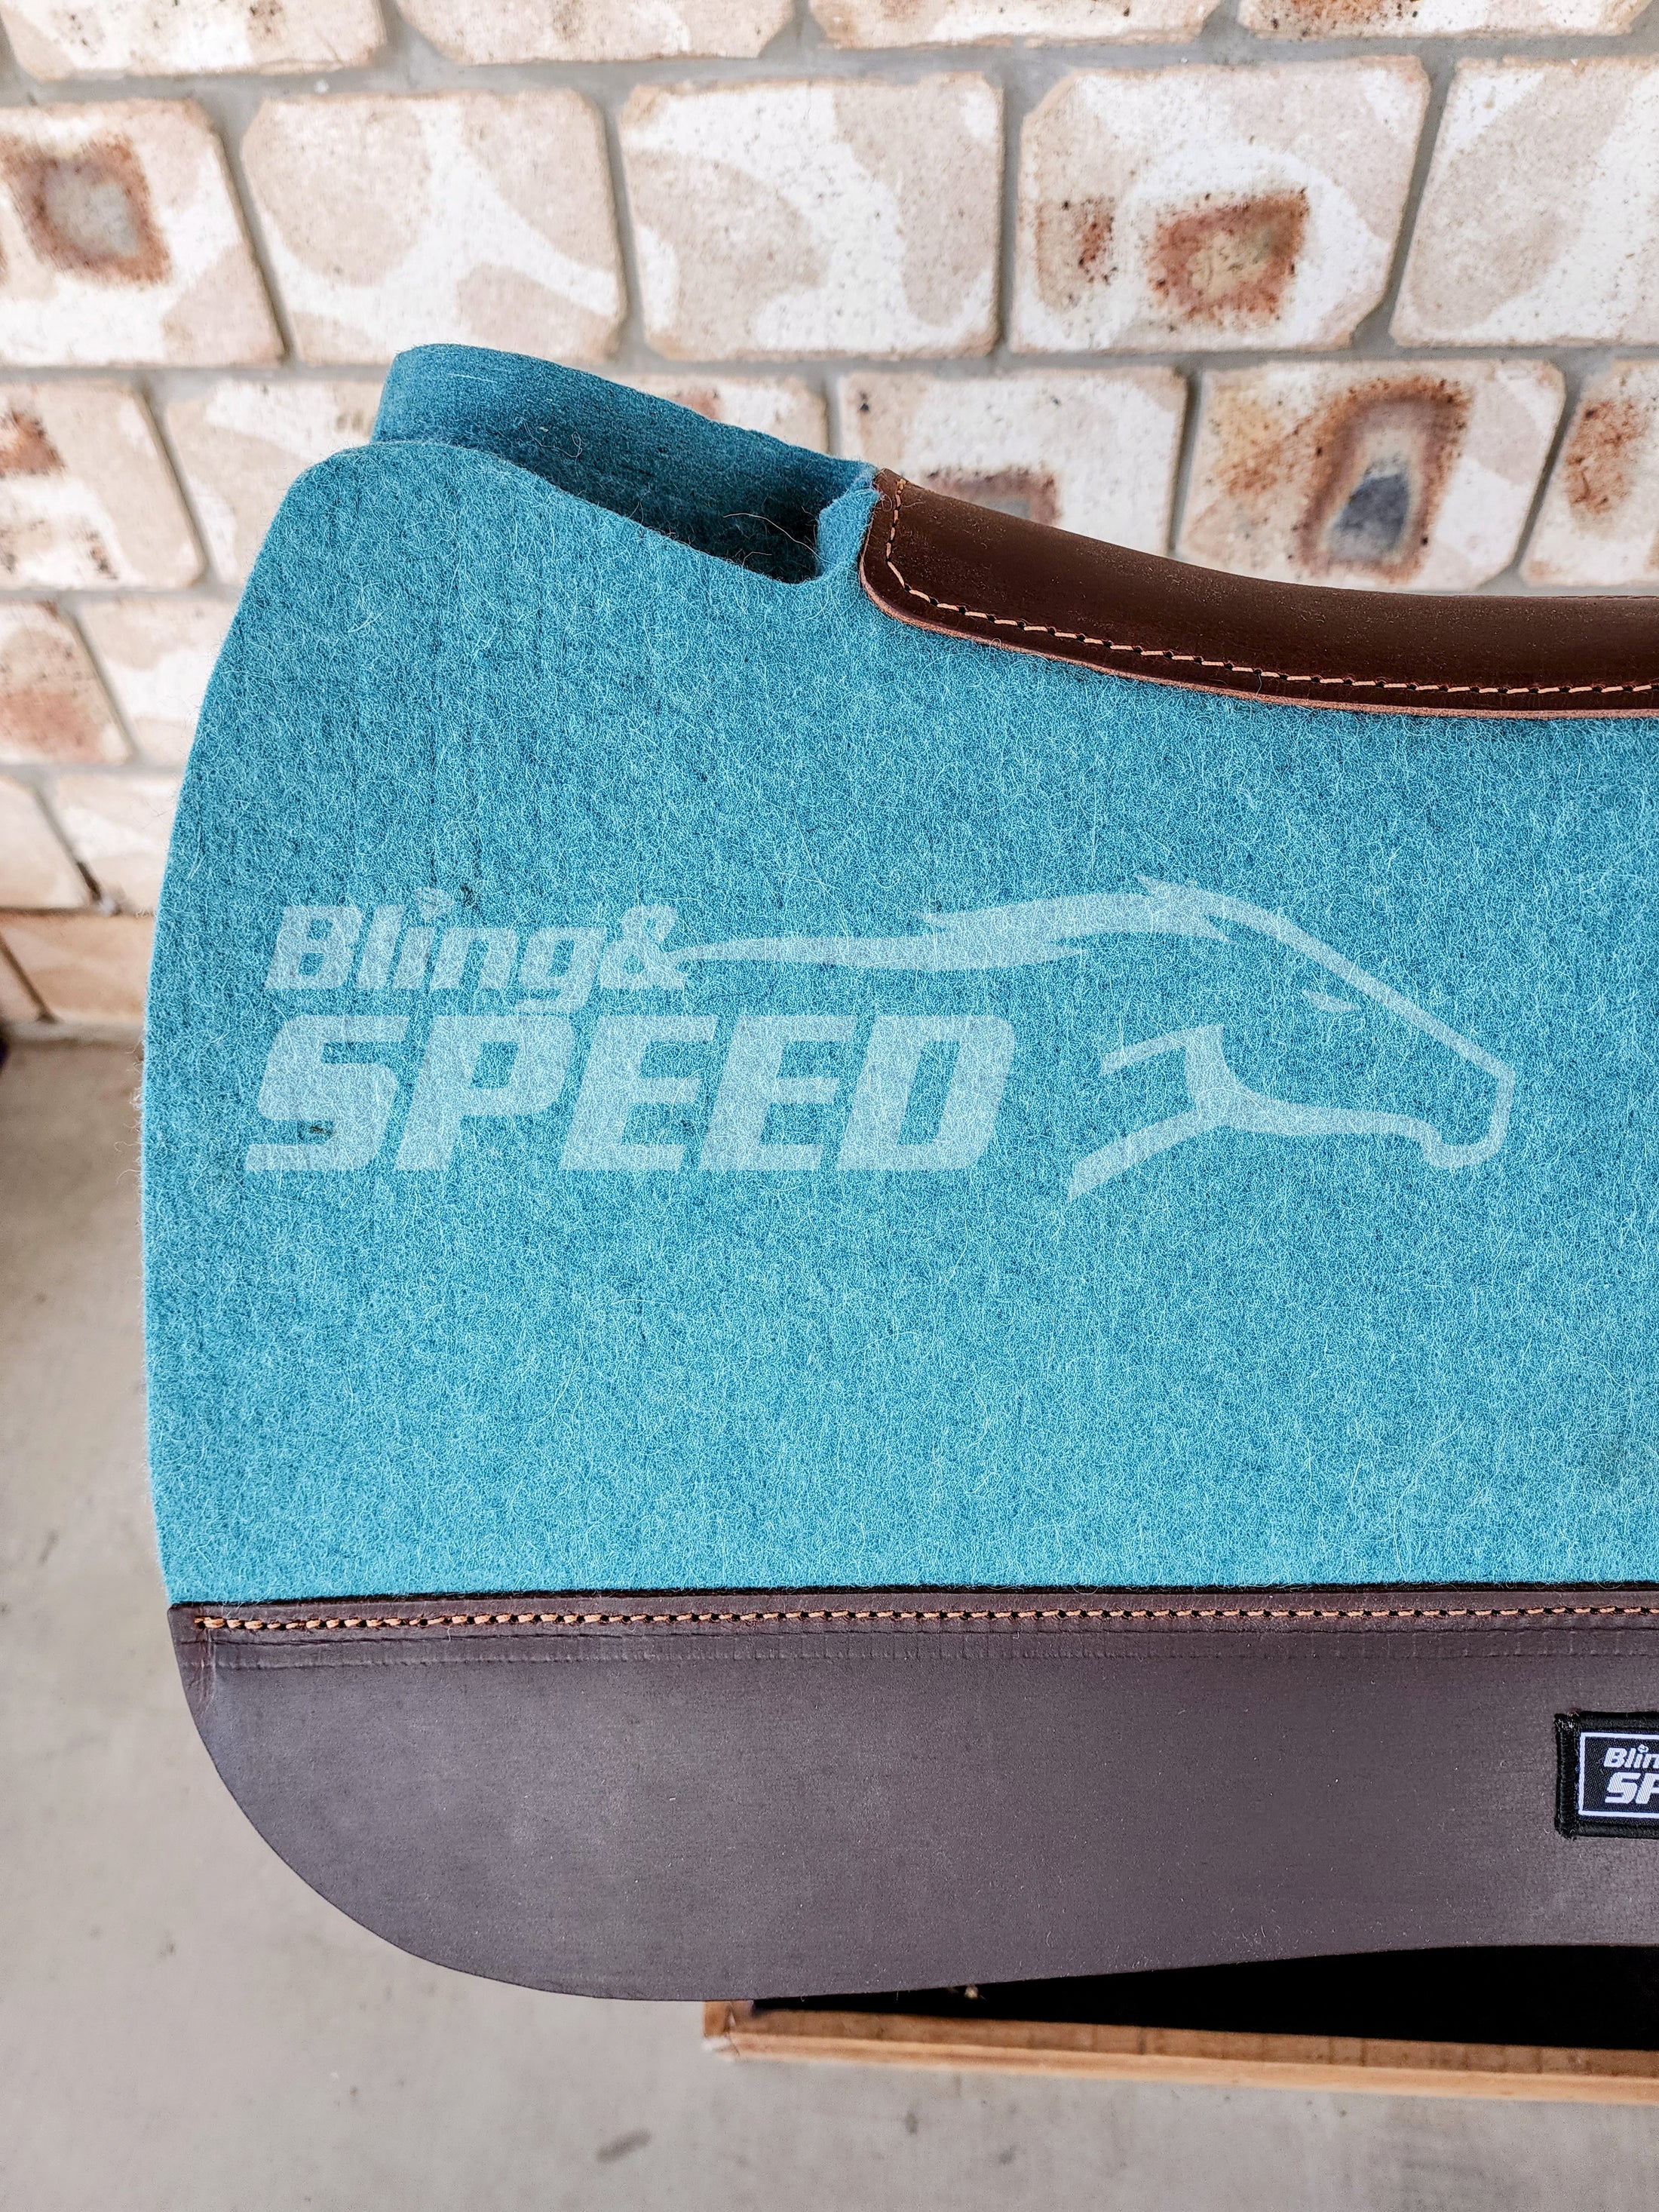 Wither Relief Saddle Pad - Turquoise (7954225234158)